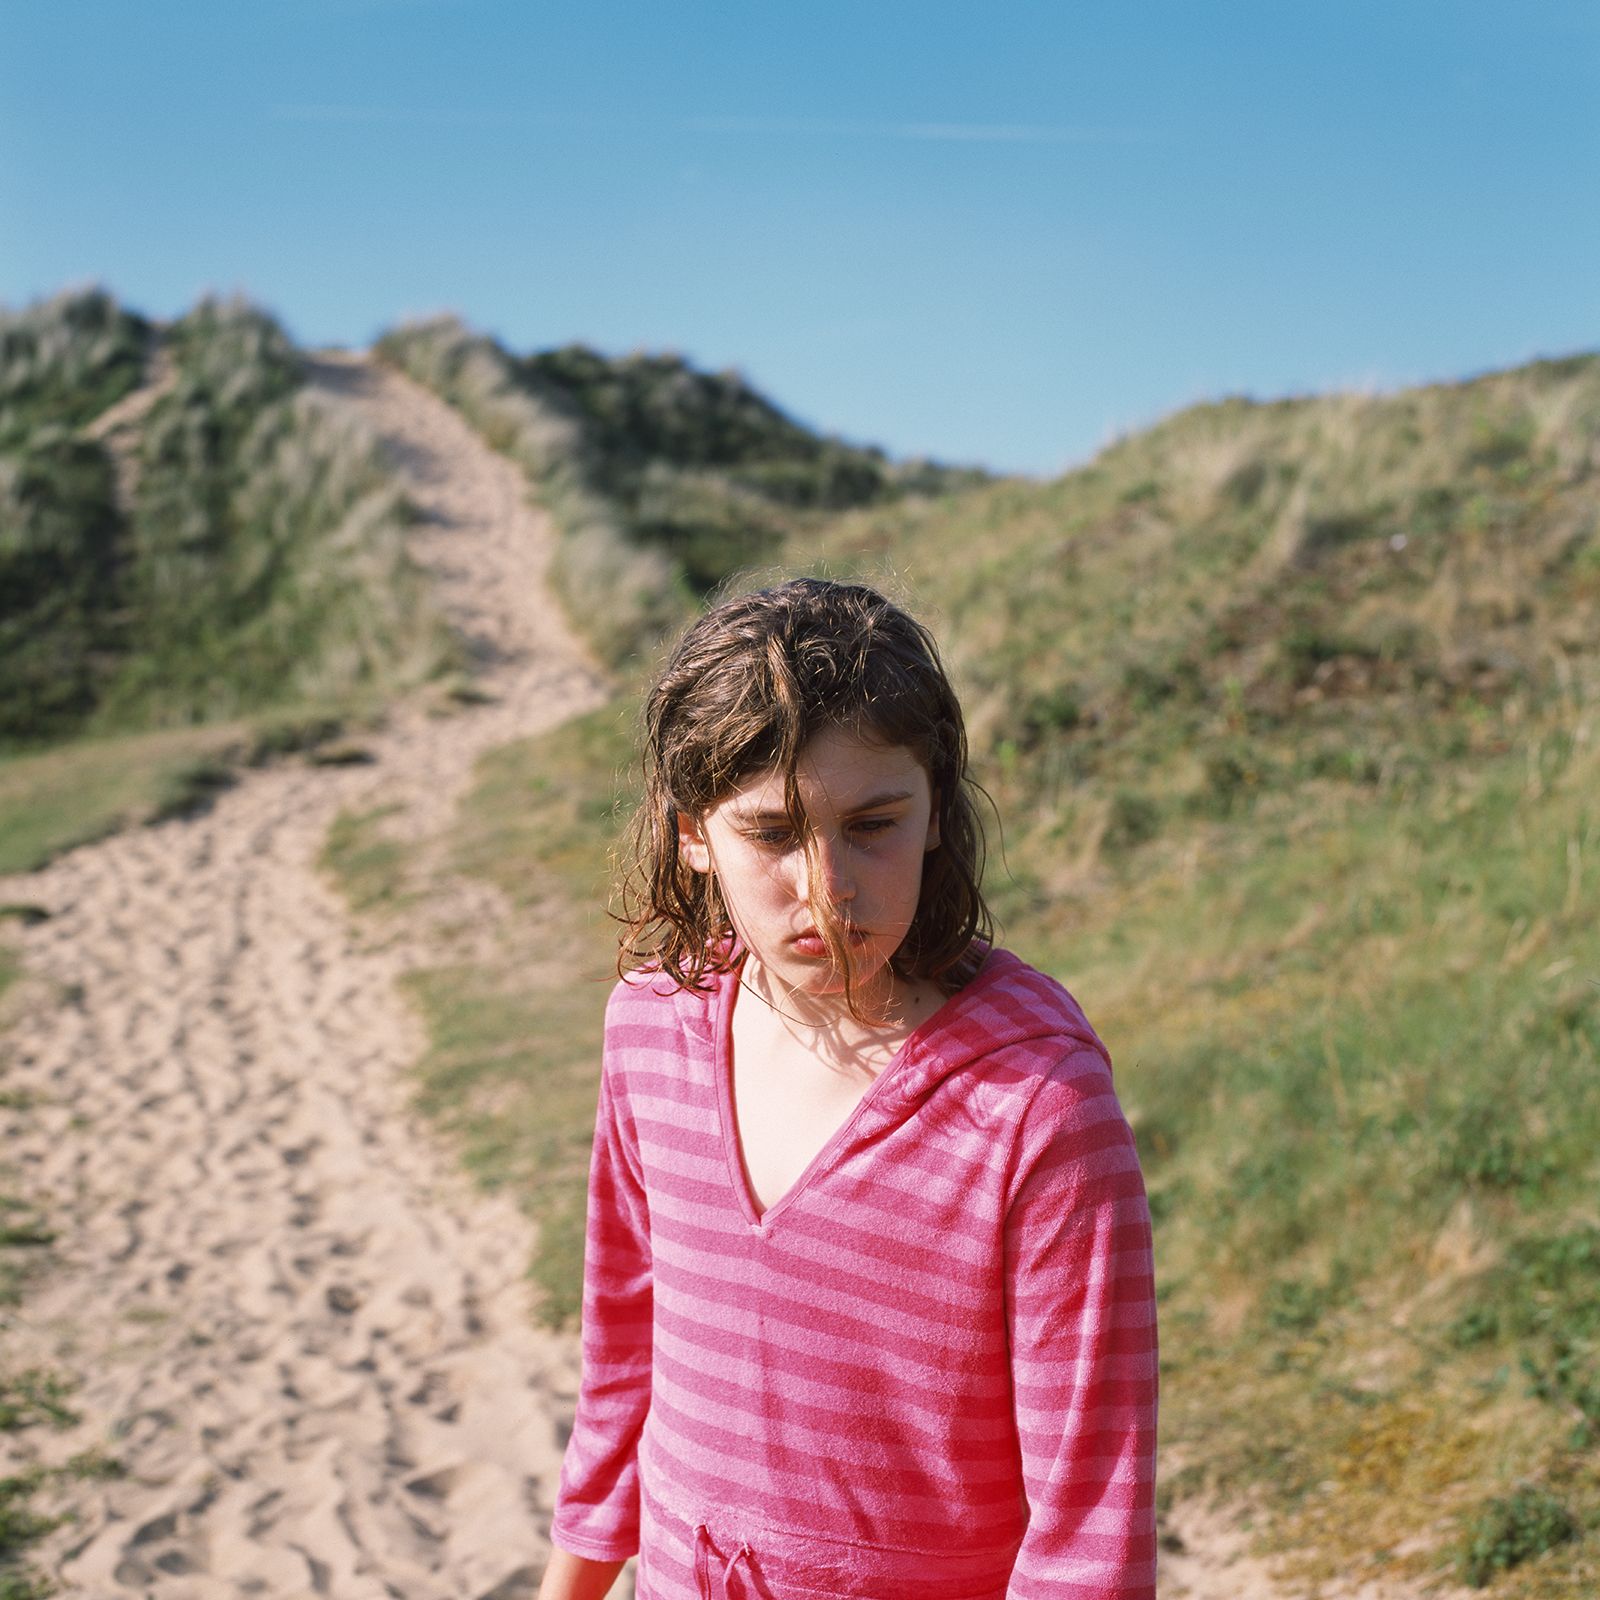 © Colin Pantall - Image from the All Quiet on the home front photography project